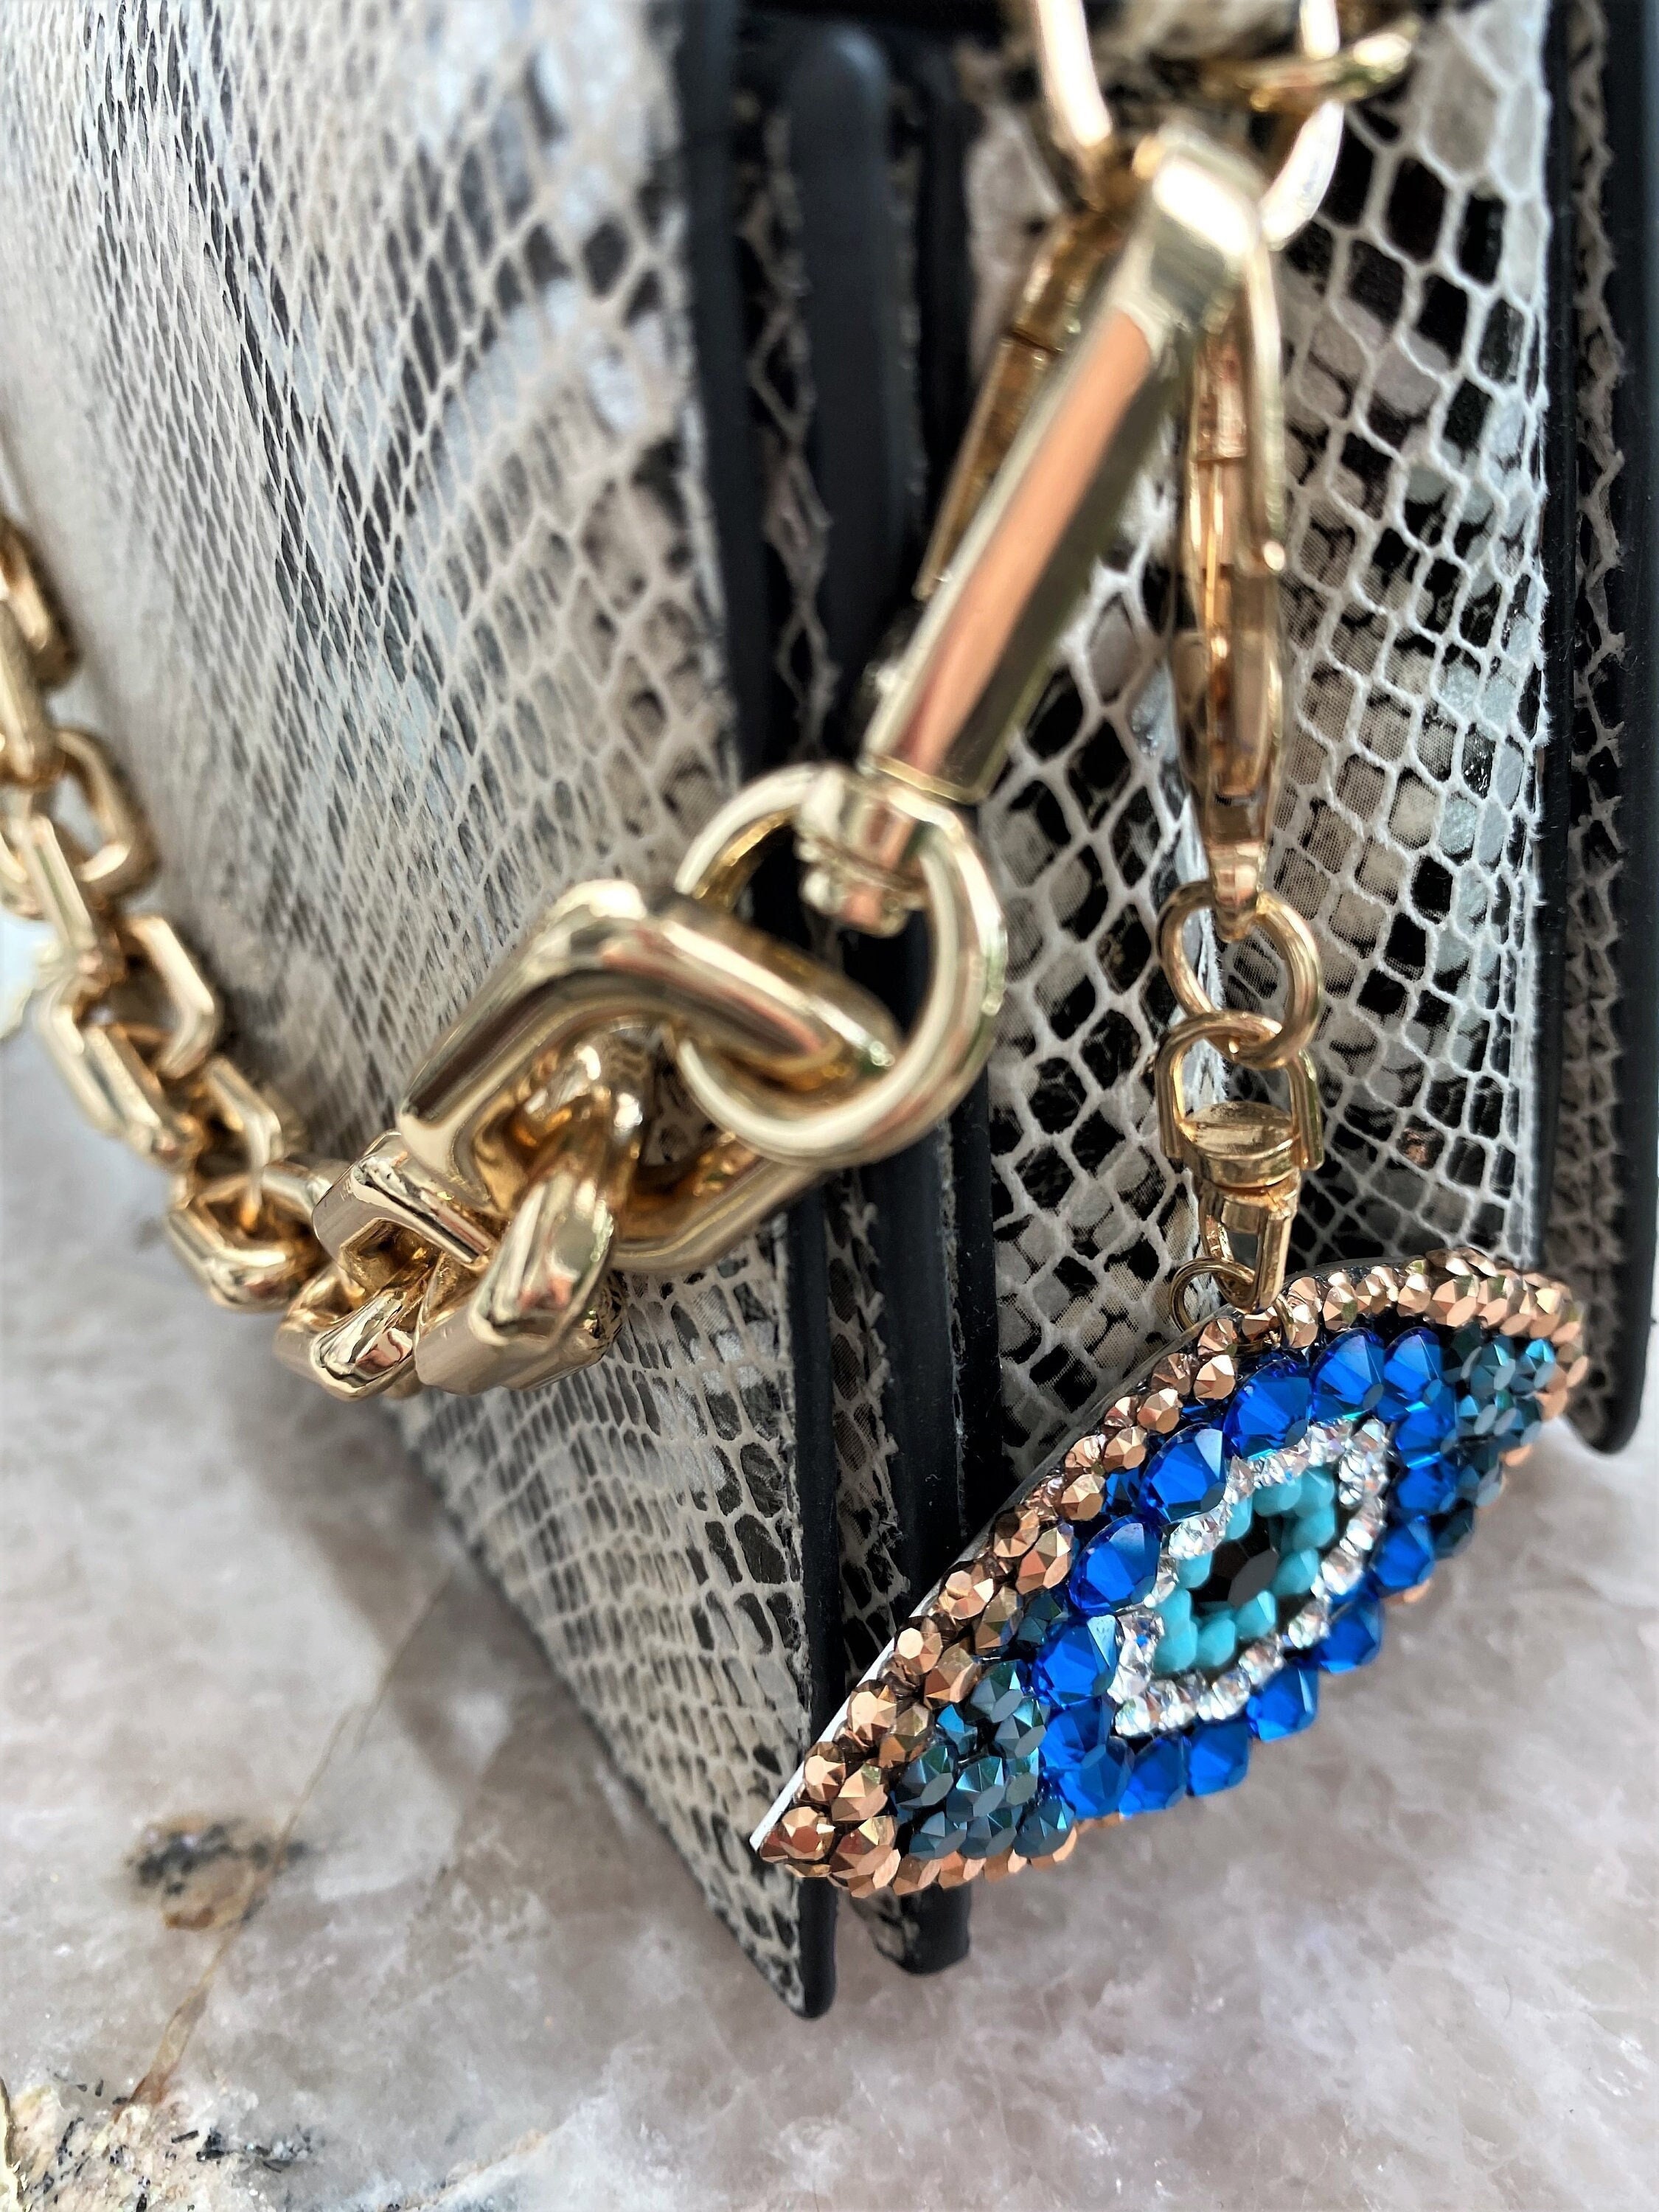 Ea142 Illustre Hollywood Drive Key Holder Initial Women Wholesale Keychain  Luxury Purse Leather Charms for Accessories Hand Cute Designer Luxury Bag  Charm - China Designer Luxury Bag Charm and Leather Bag Charm